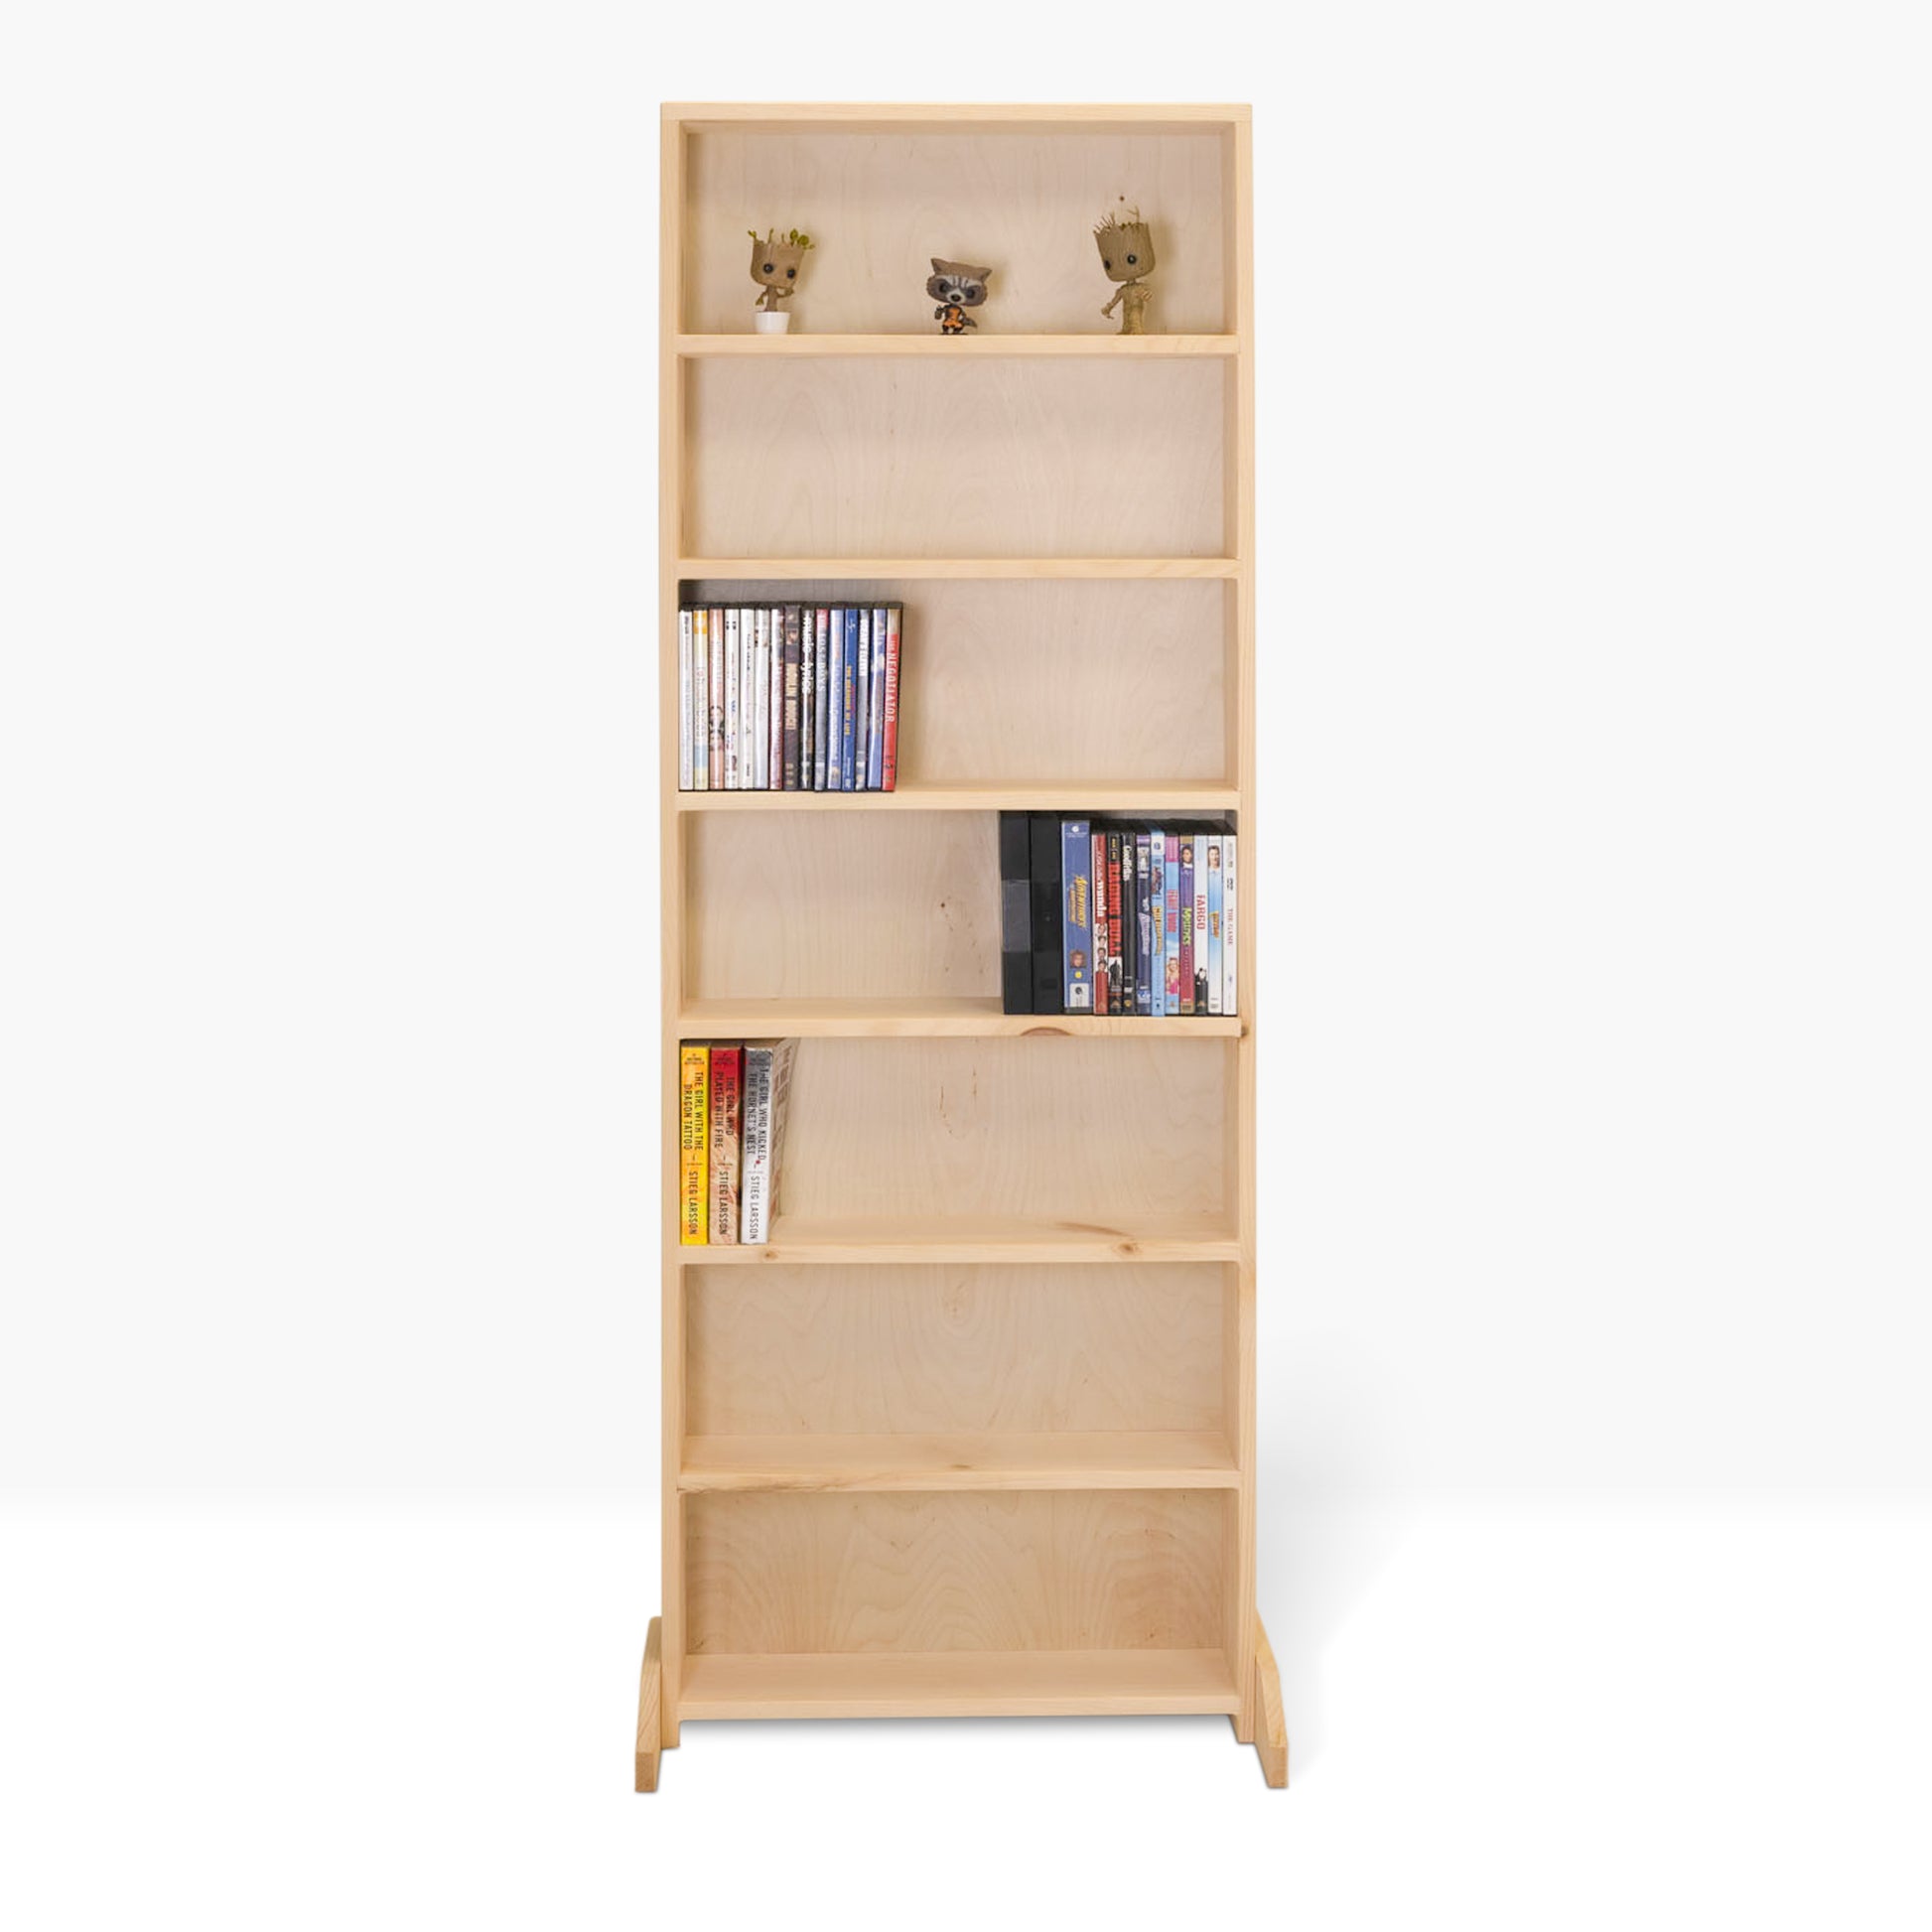 Evergreen DVD Shelf shown with seven spaces, built from unfinished white pine.